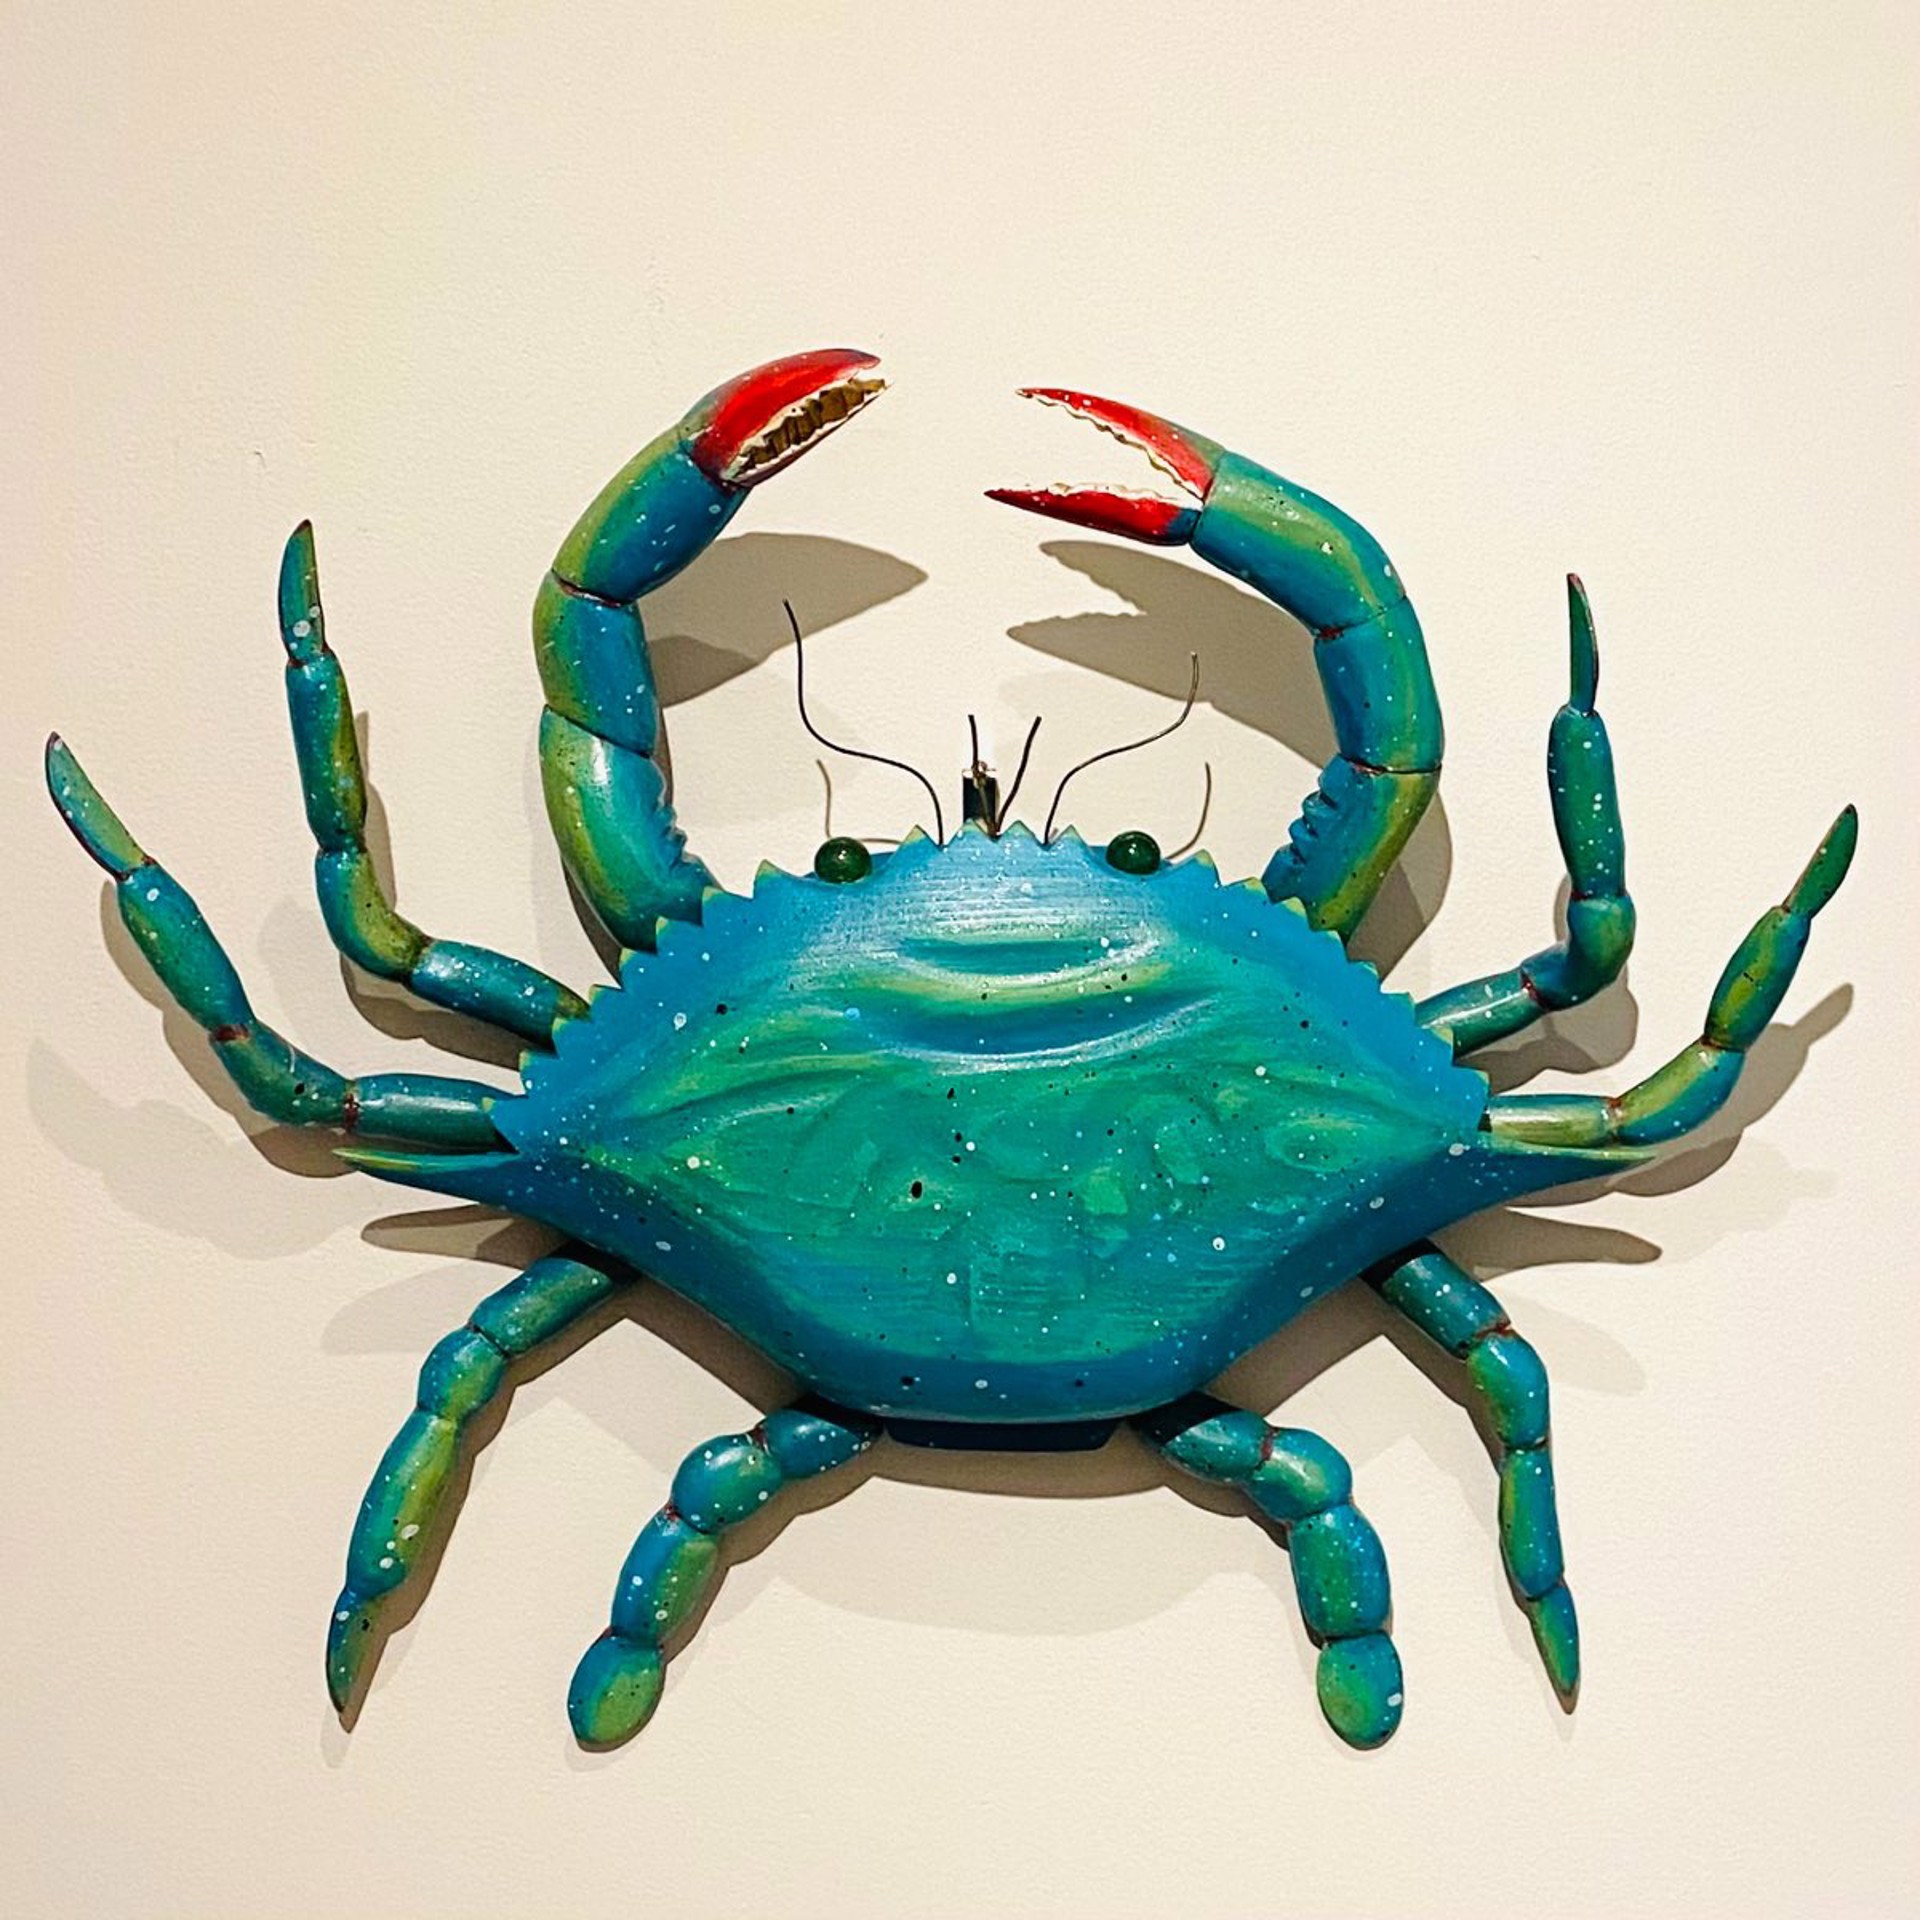 JW22-94 "Just Be Claws" Branch Crab by Jo Watson